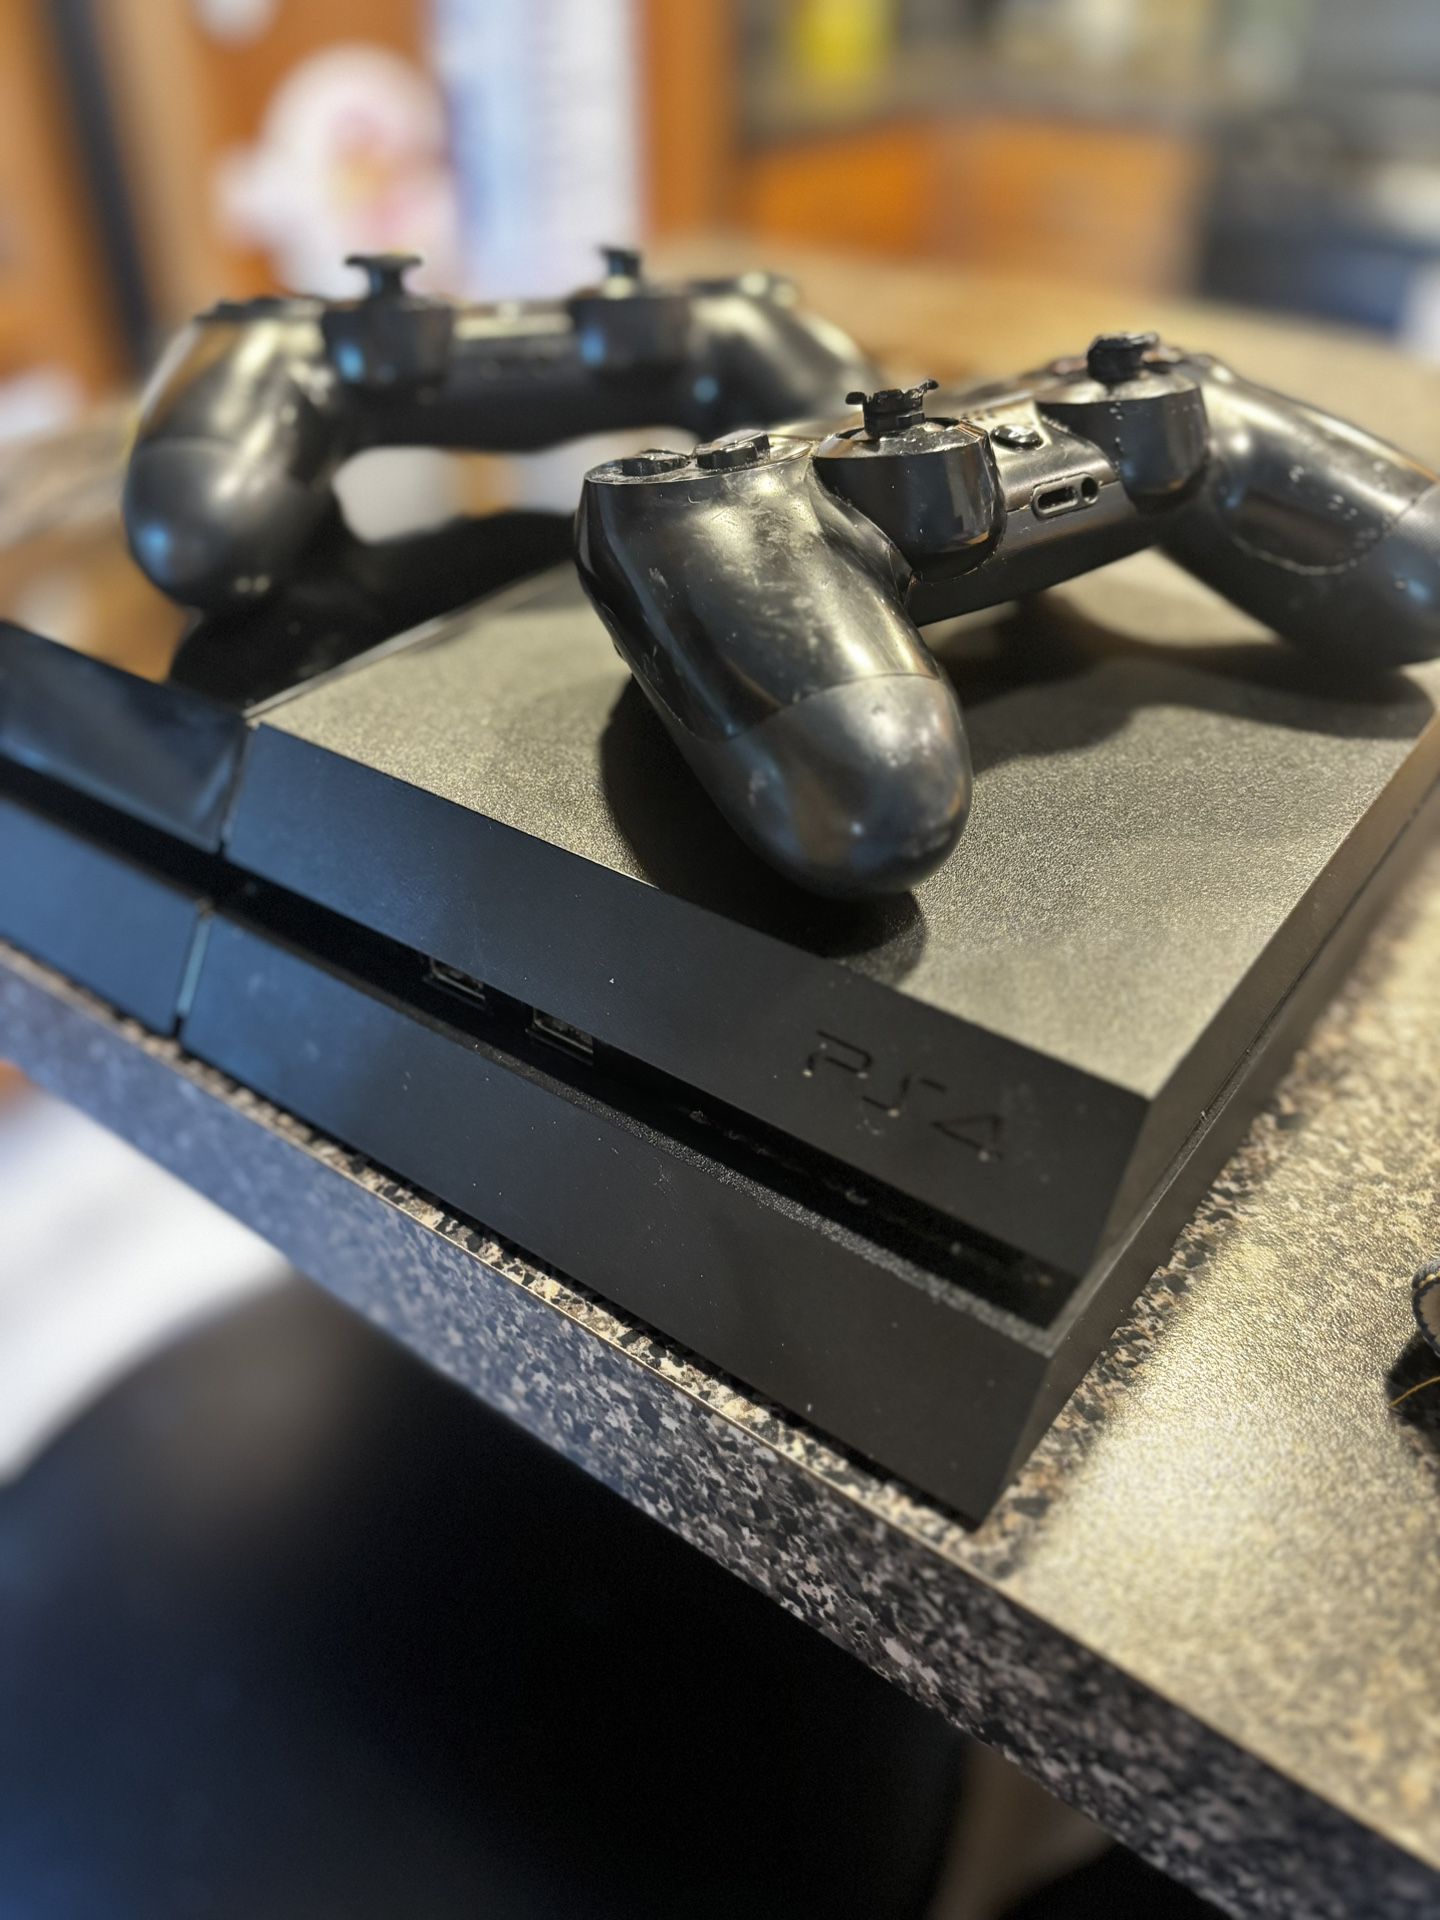 PS4 With Two Controllers